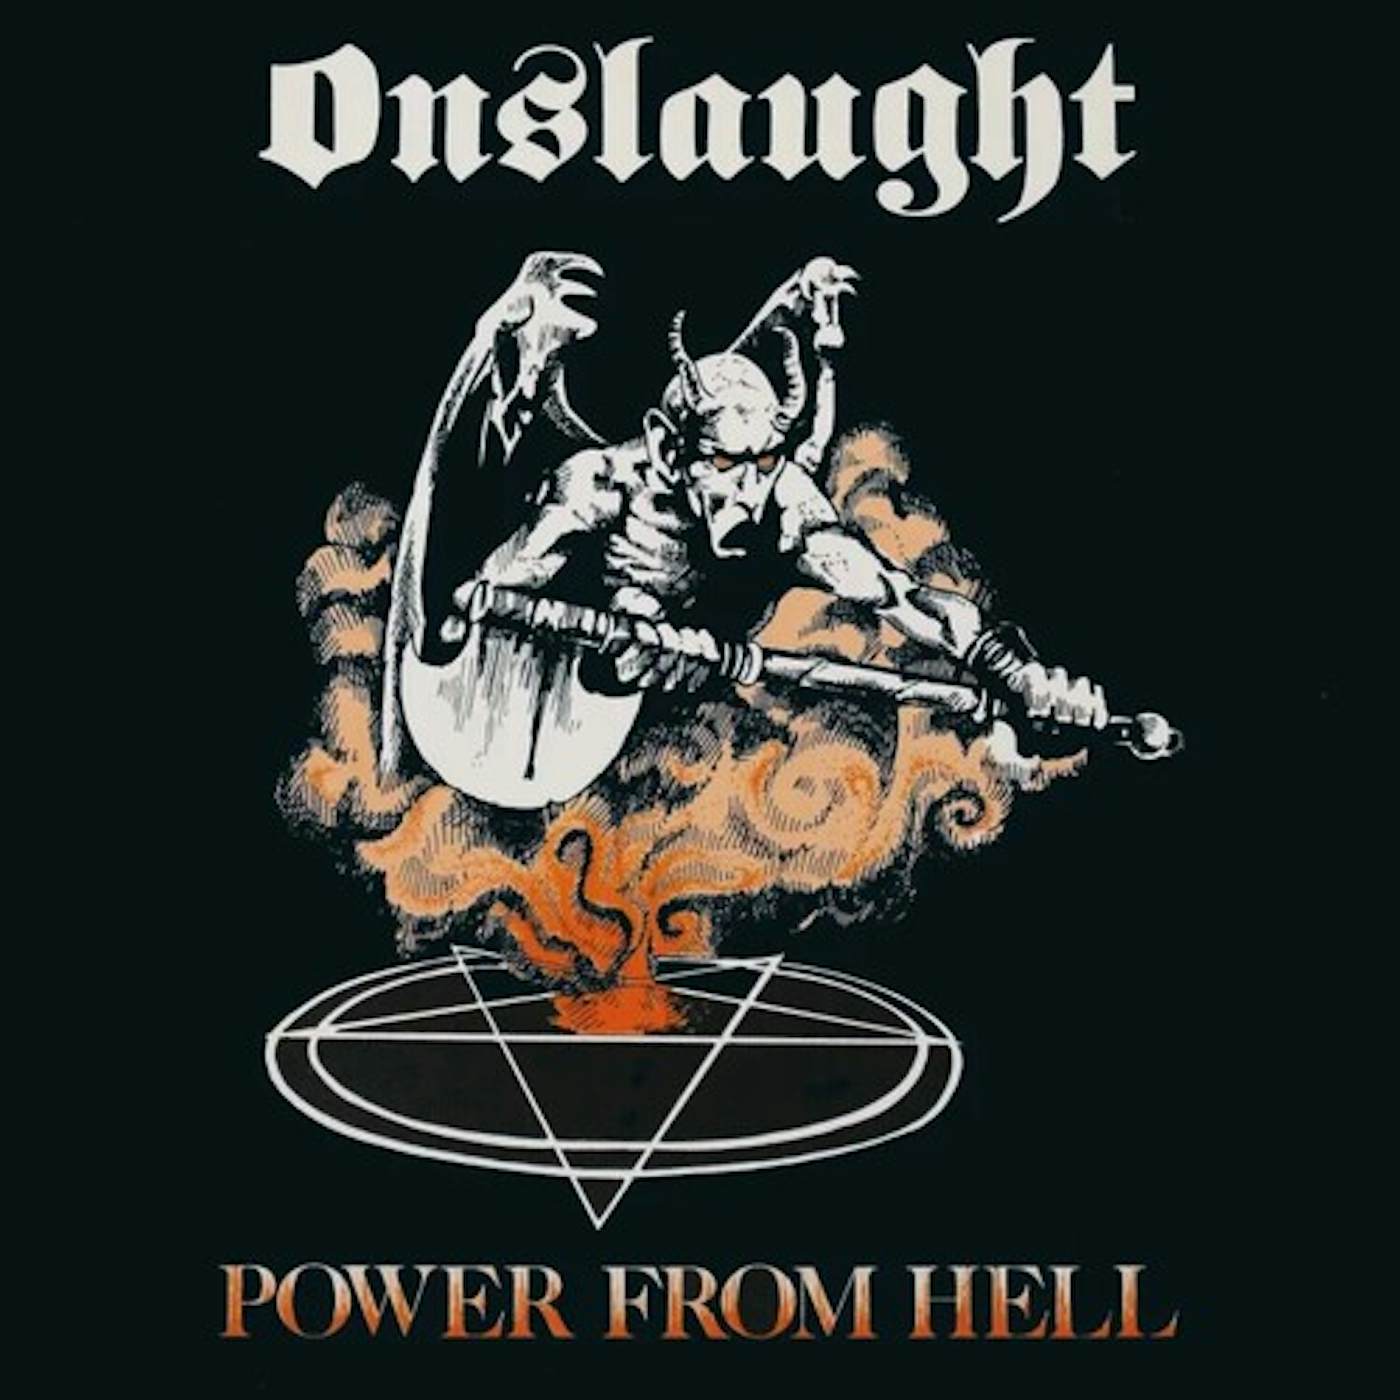 Onslaught Power from Hell Vinyl Record